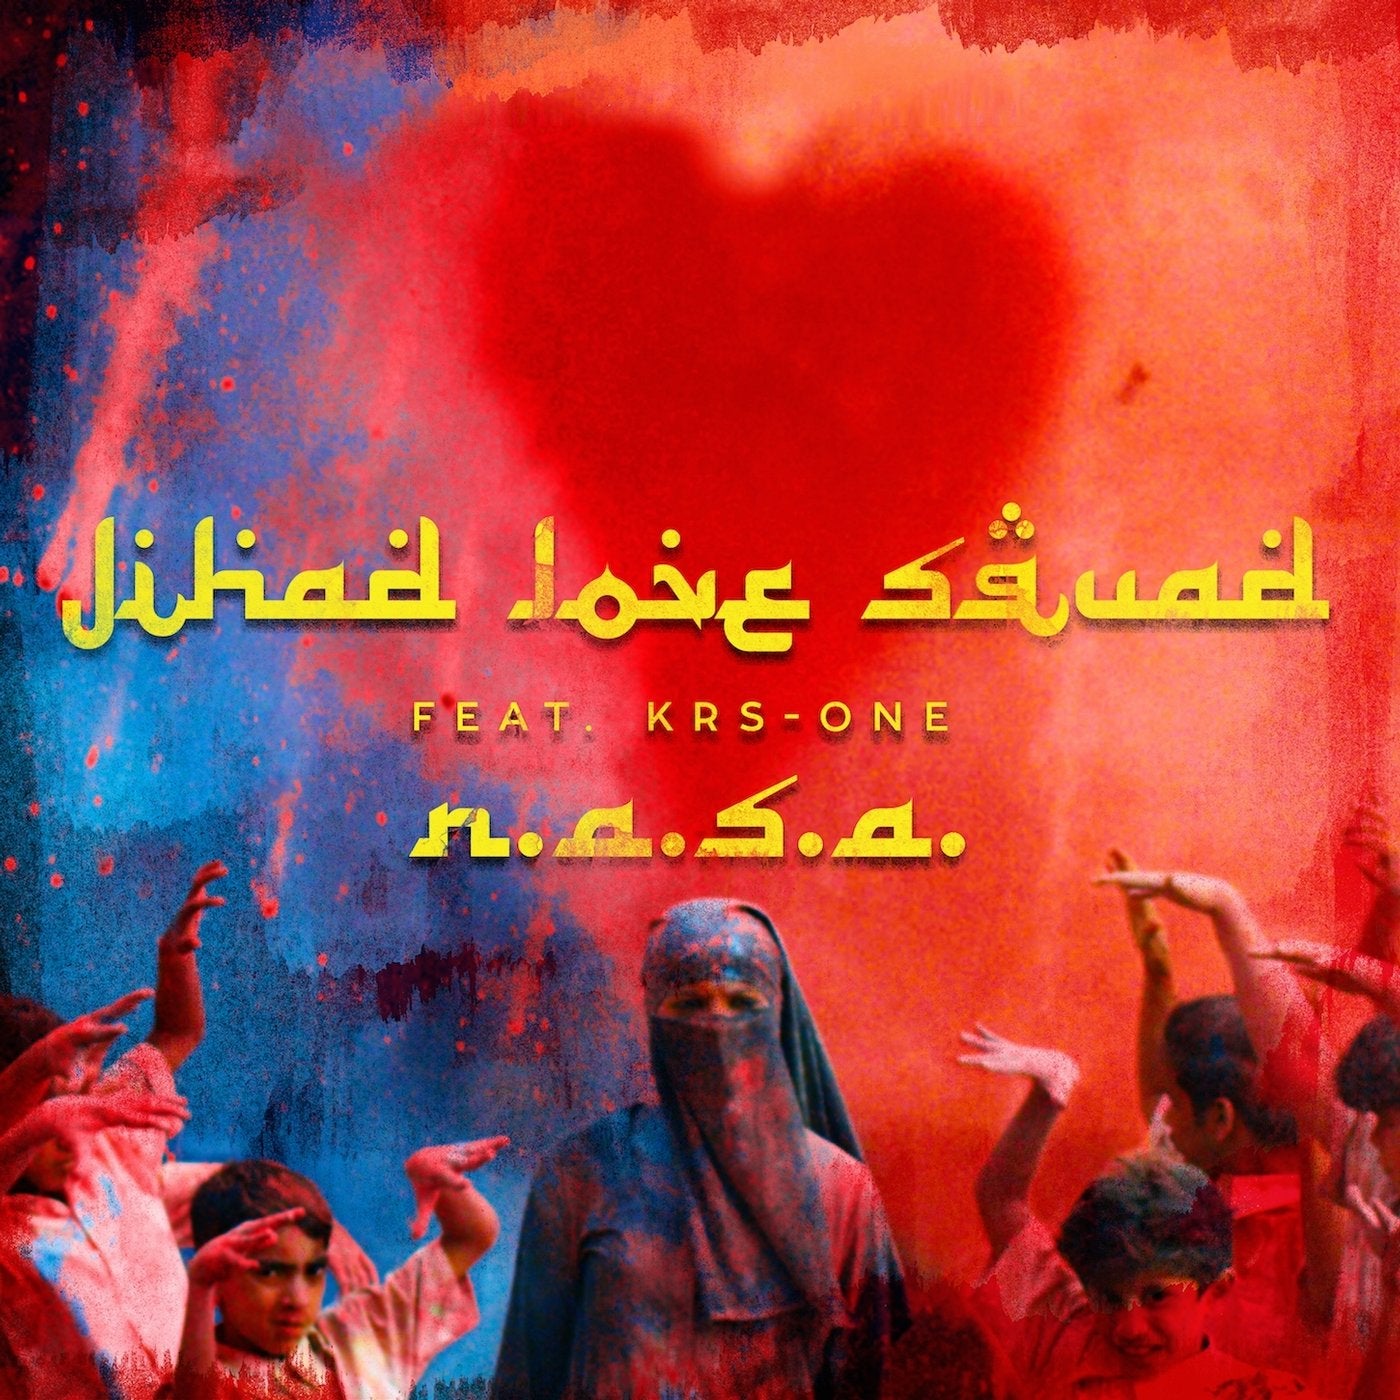 Jihad Love Squad (Featuring KRS-One)